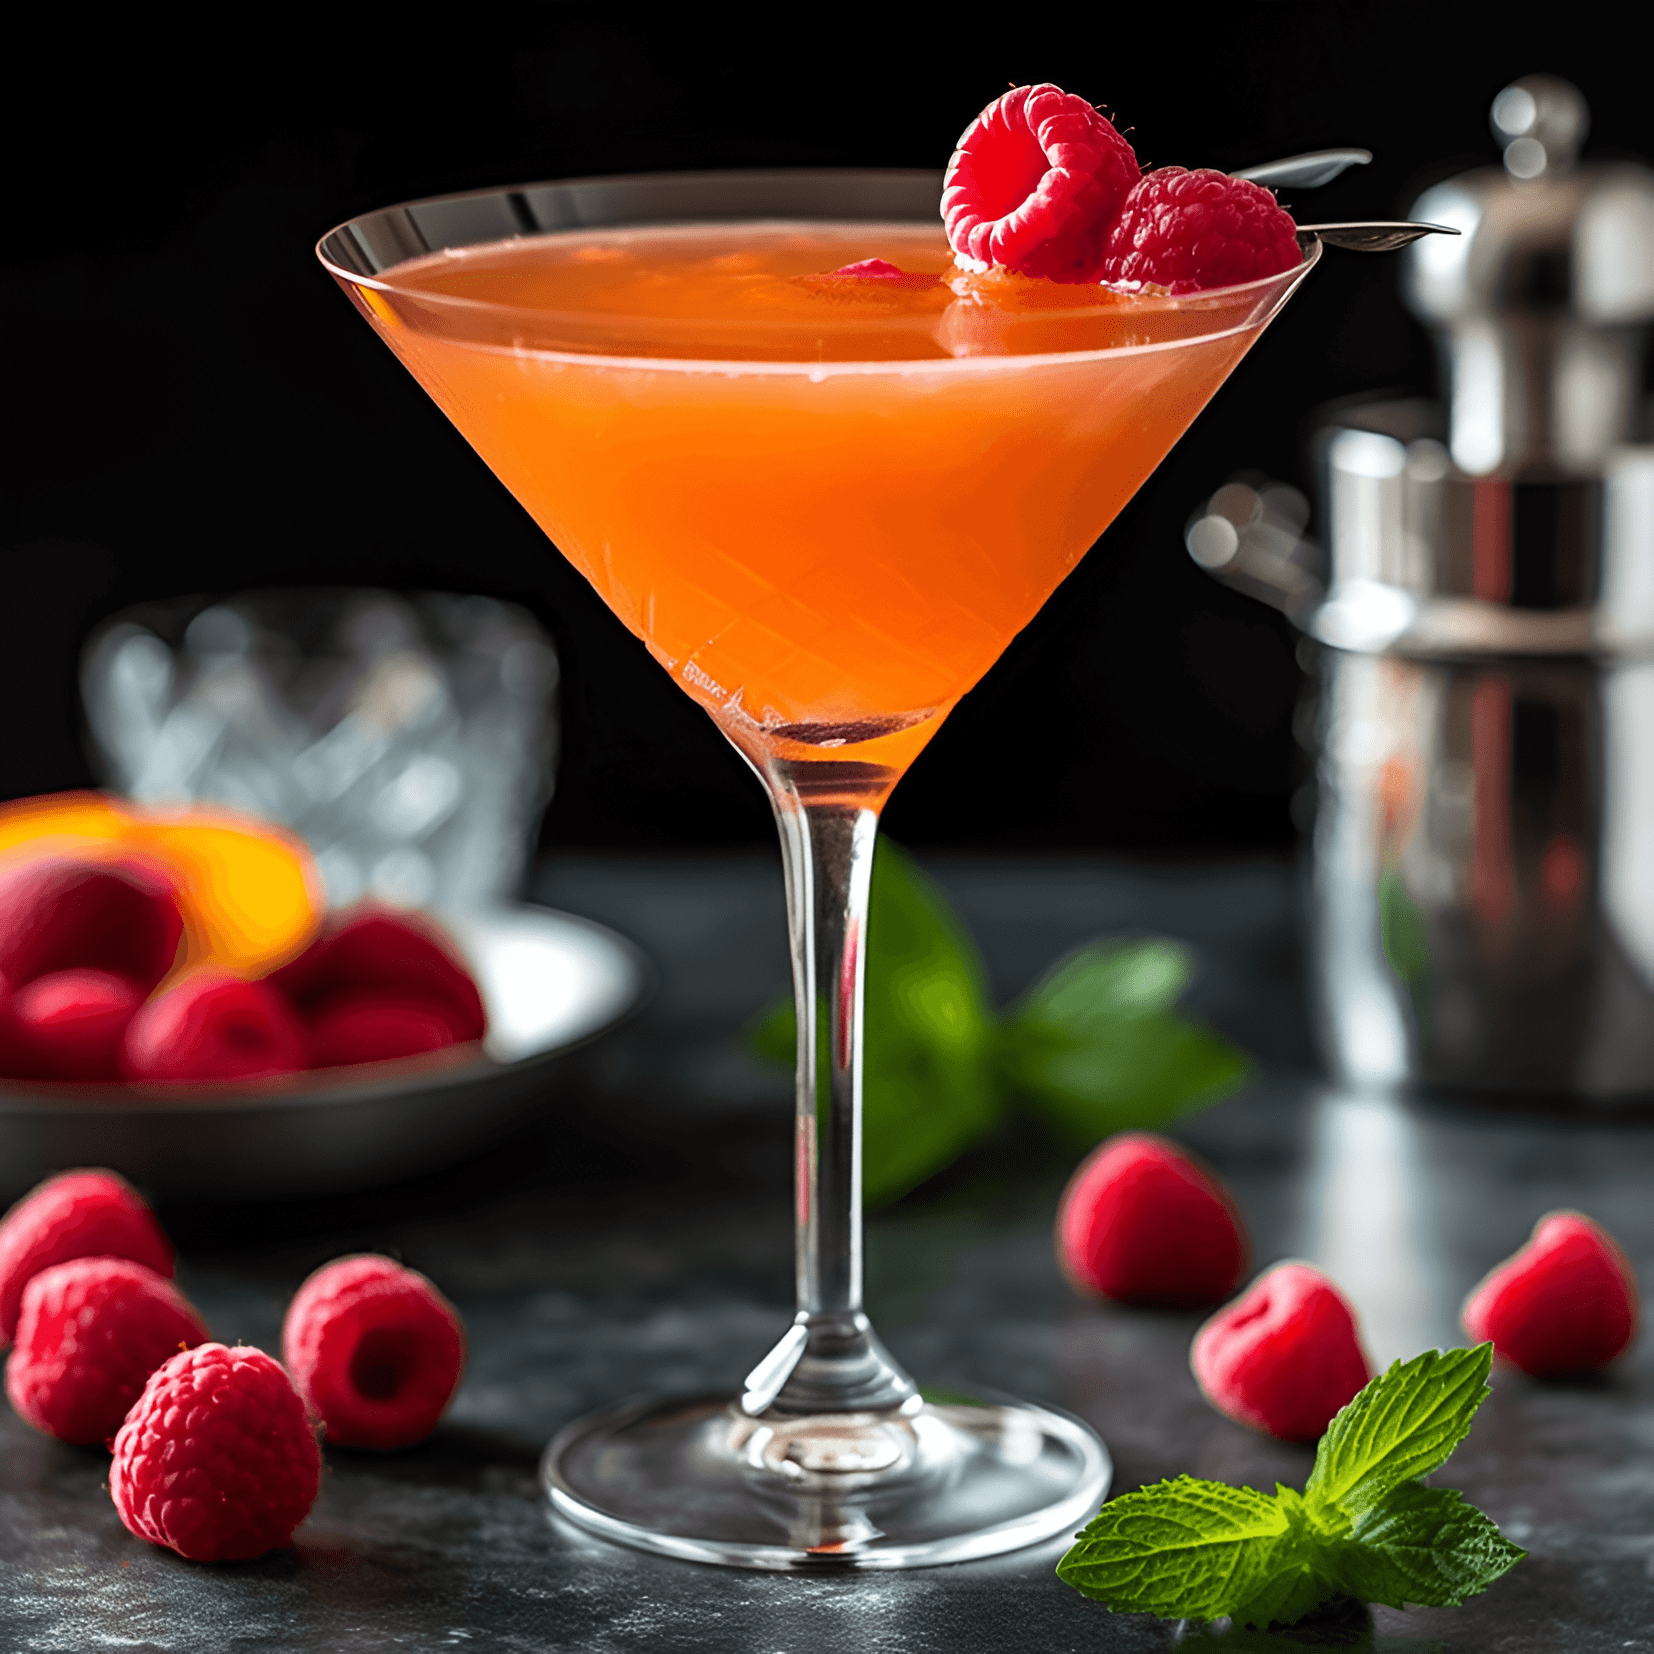 Peach Melba Cocktail Recipe - The Peach Melba cocktail is a harmonious blend of sweet, tart, and fruity flavors. The peach and raspberry notes are prominent, while the hint of vanilla adds a touch of warmth and depth. The overall taste is light, refreshing, and perfect for sipping on a warm summer day.